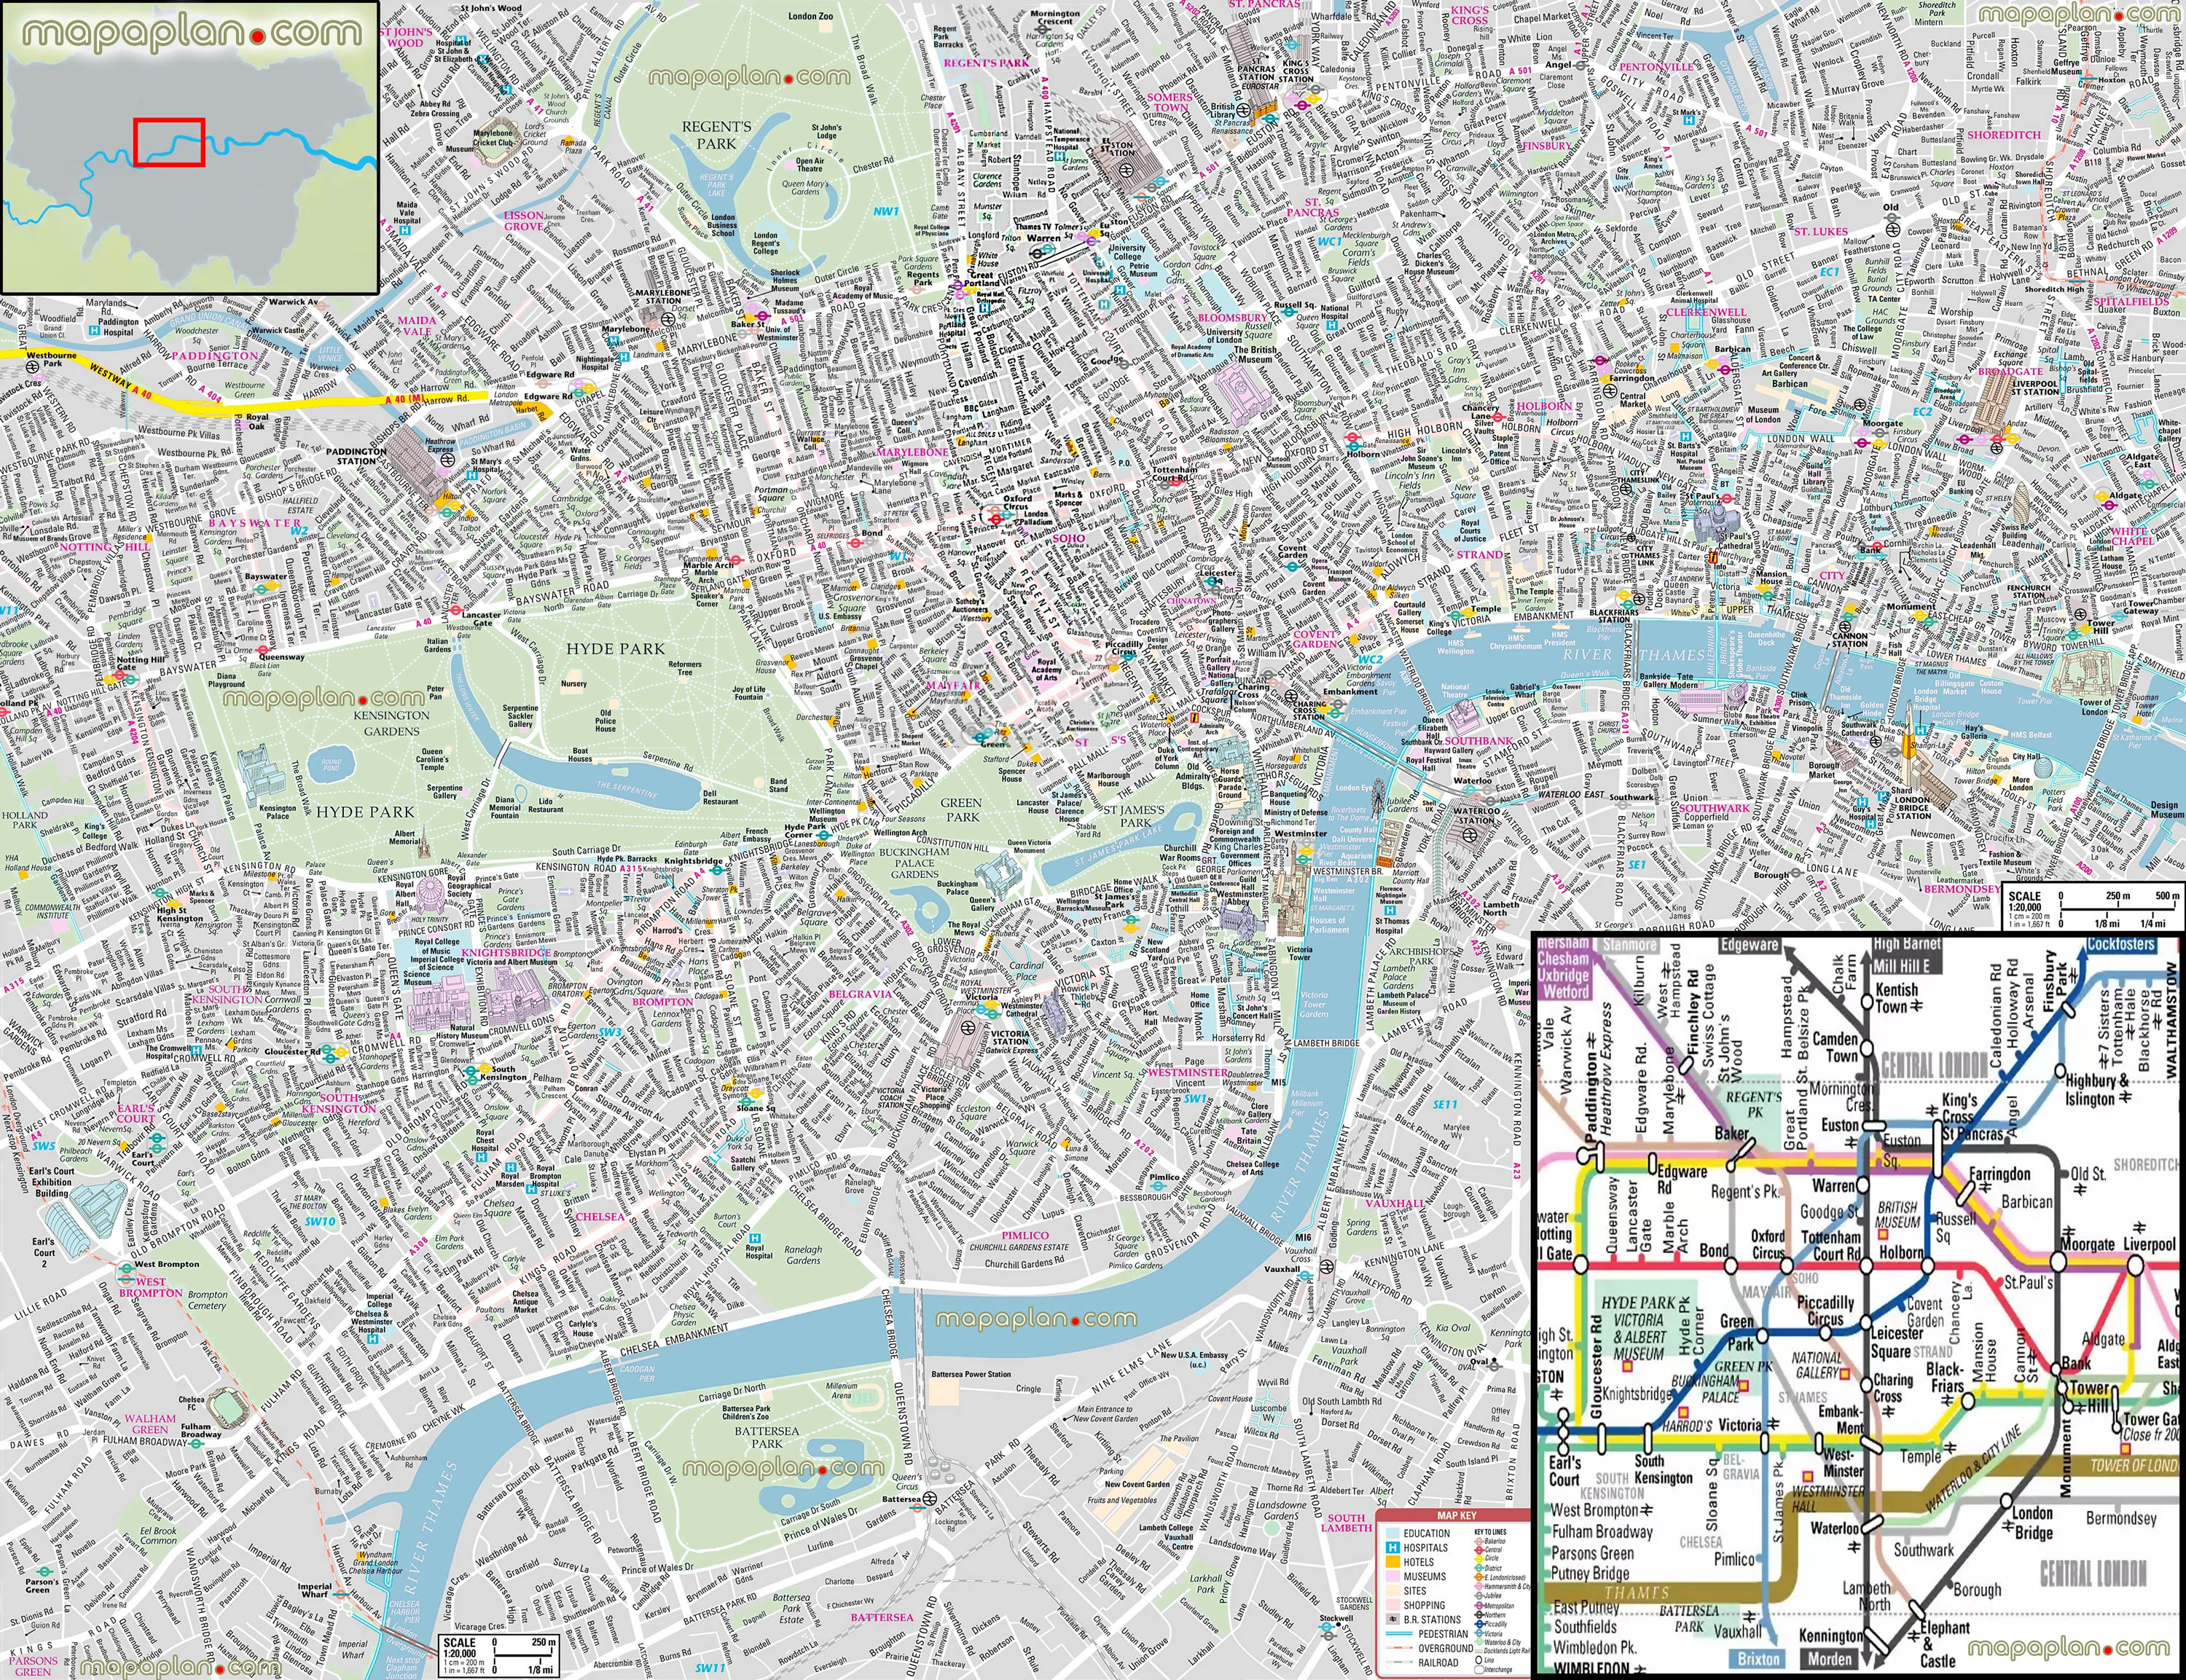 London Maps - Top Tourist Attractions - Free, Printable City Street - Printable Street Maps